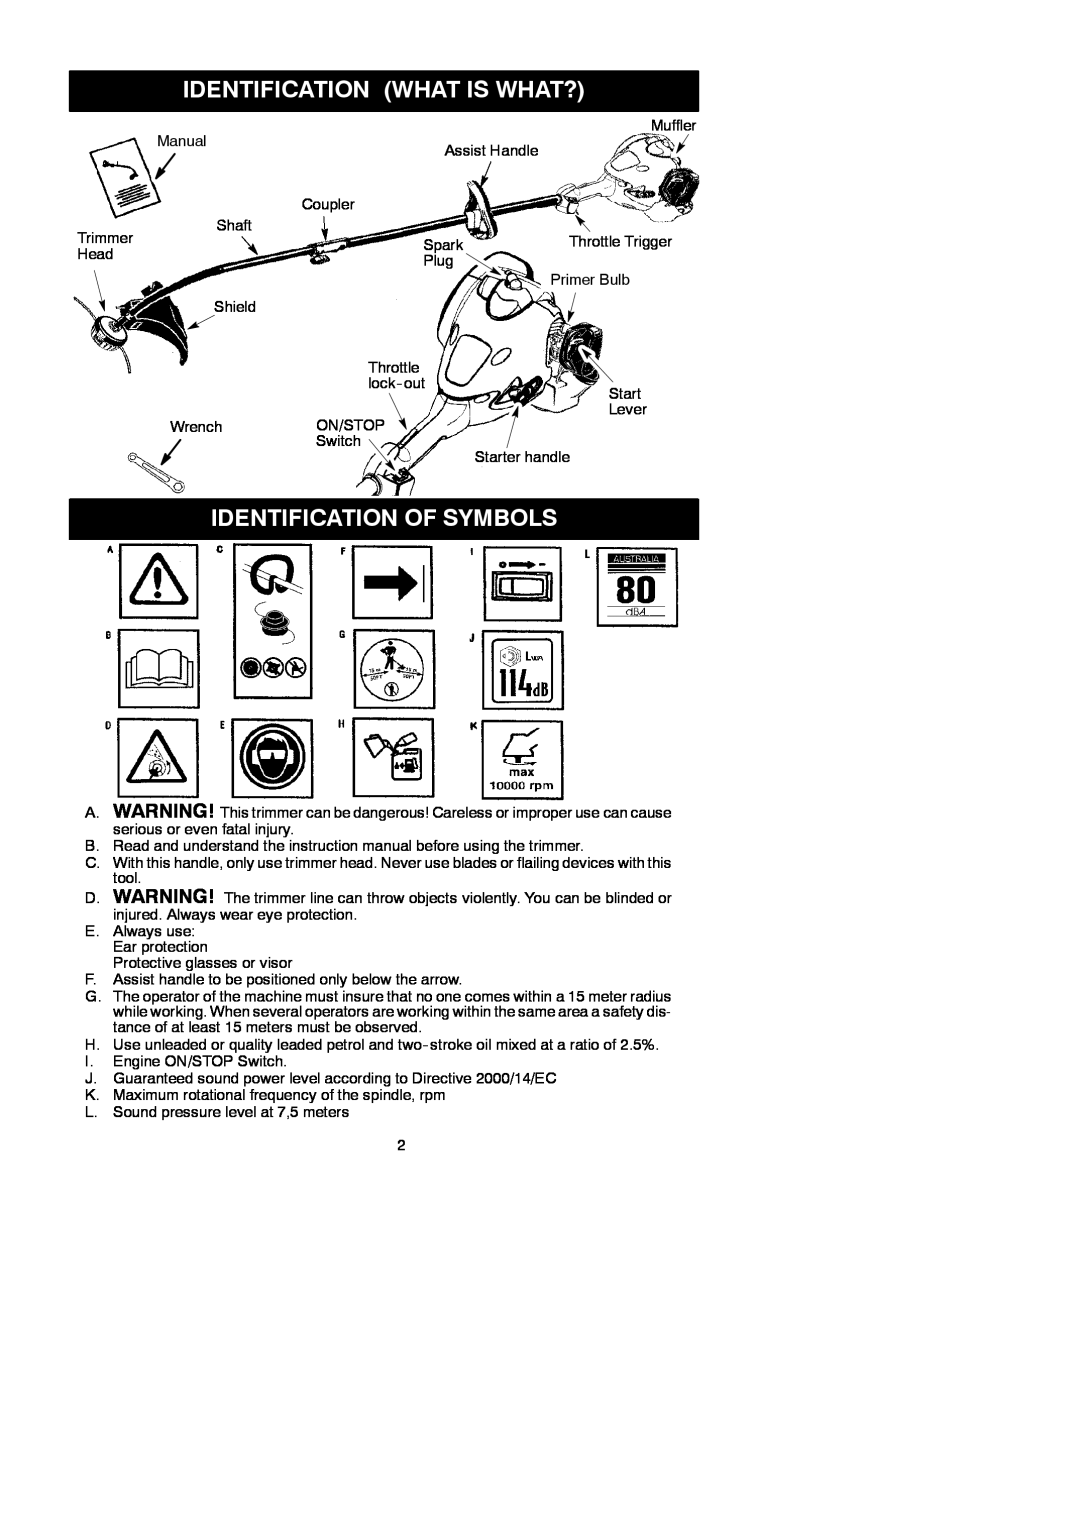 McCulloch 250CXL instruction manual Identification What Is What?, Identification Of Symbols 